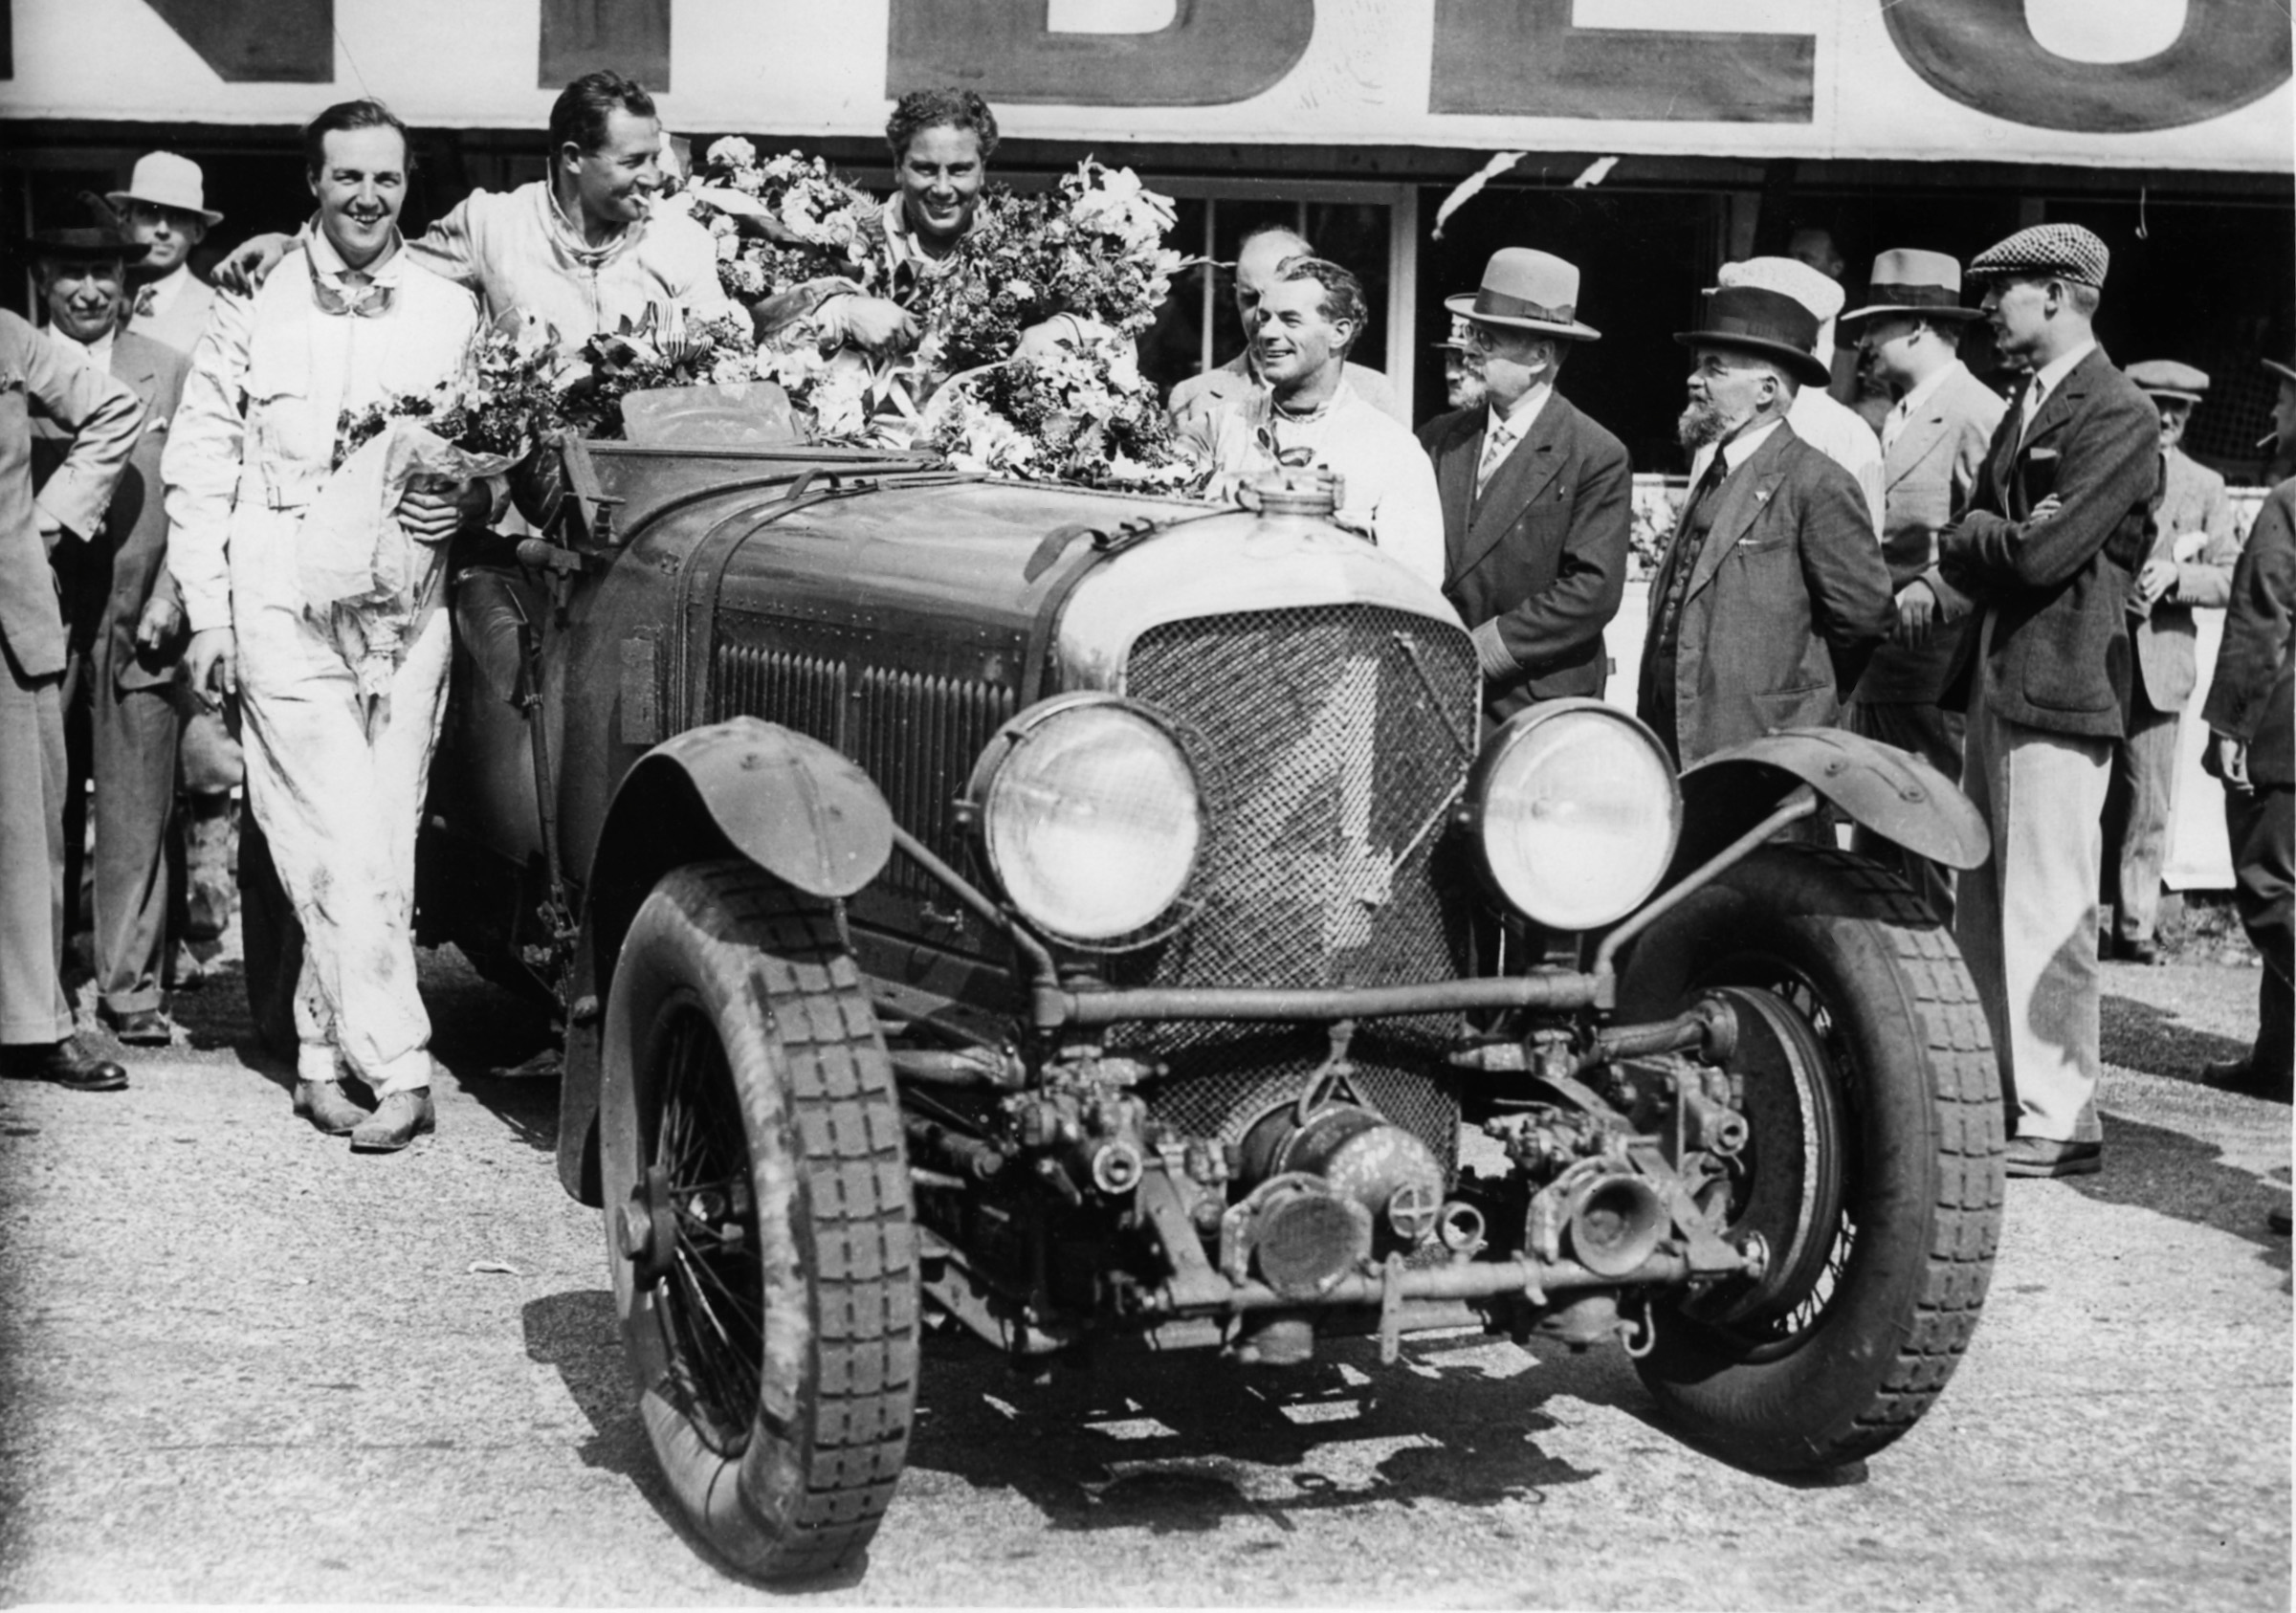 The mythical Bentley Speed Six gave Woolf Barnato and Glen Kidston a fourth win in a row. The British marque wouldn't triumph at Le Mans again until 2003, some 73 years later.